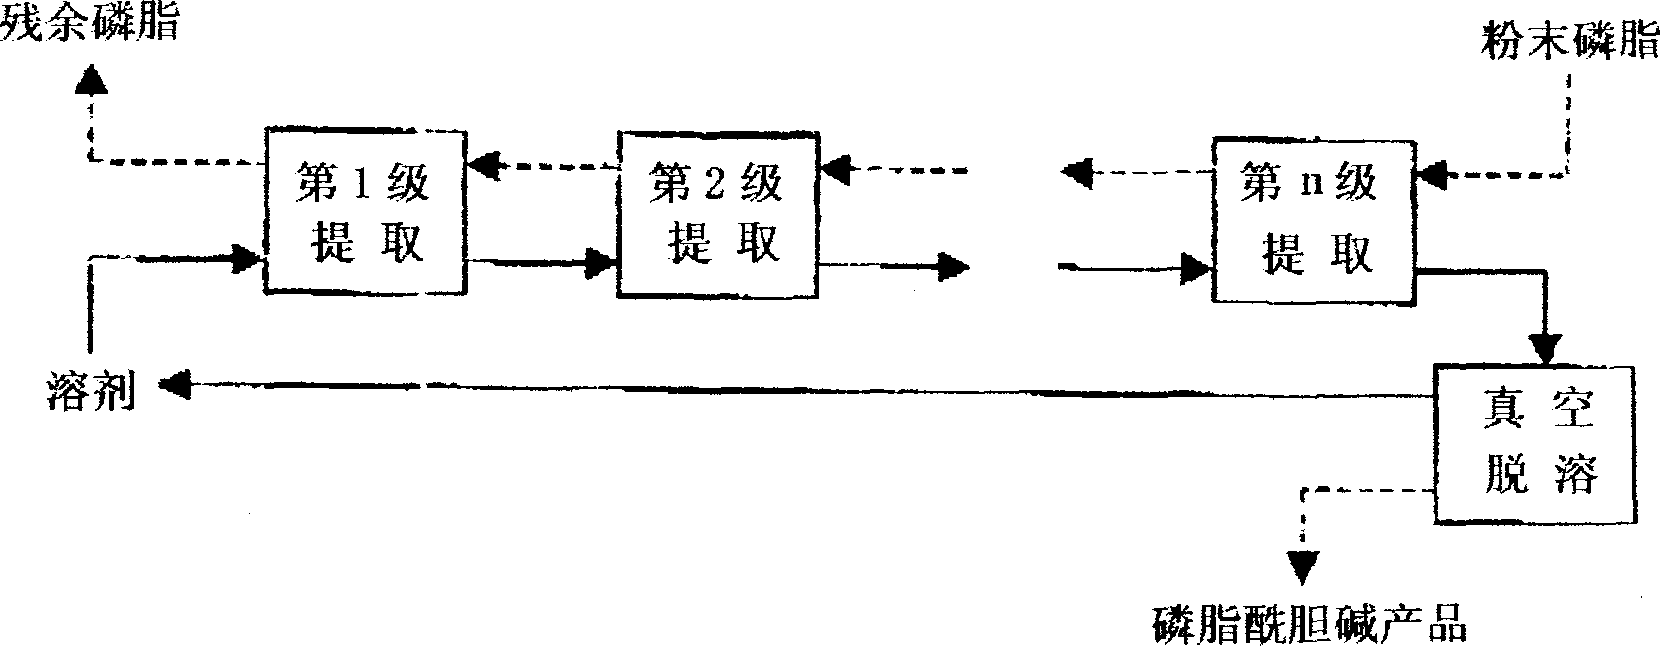 Process for extracting phosphatidecholine from powdered soybean phosphatide